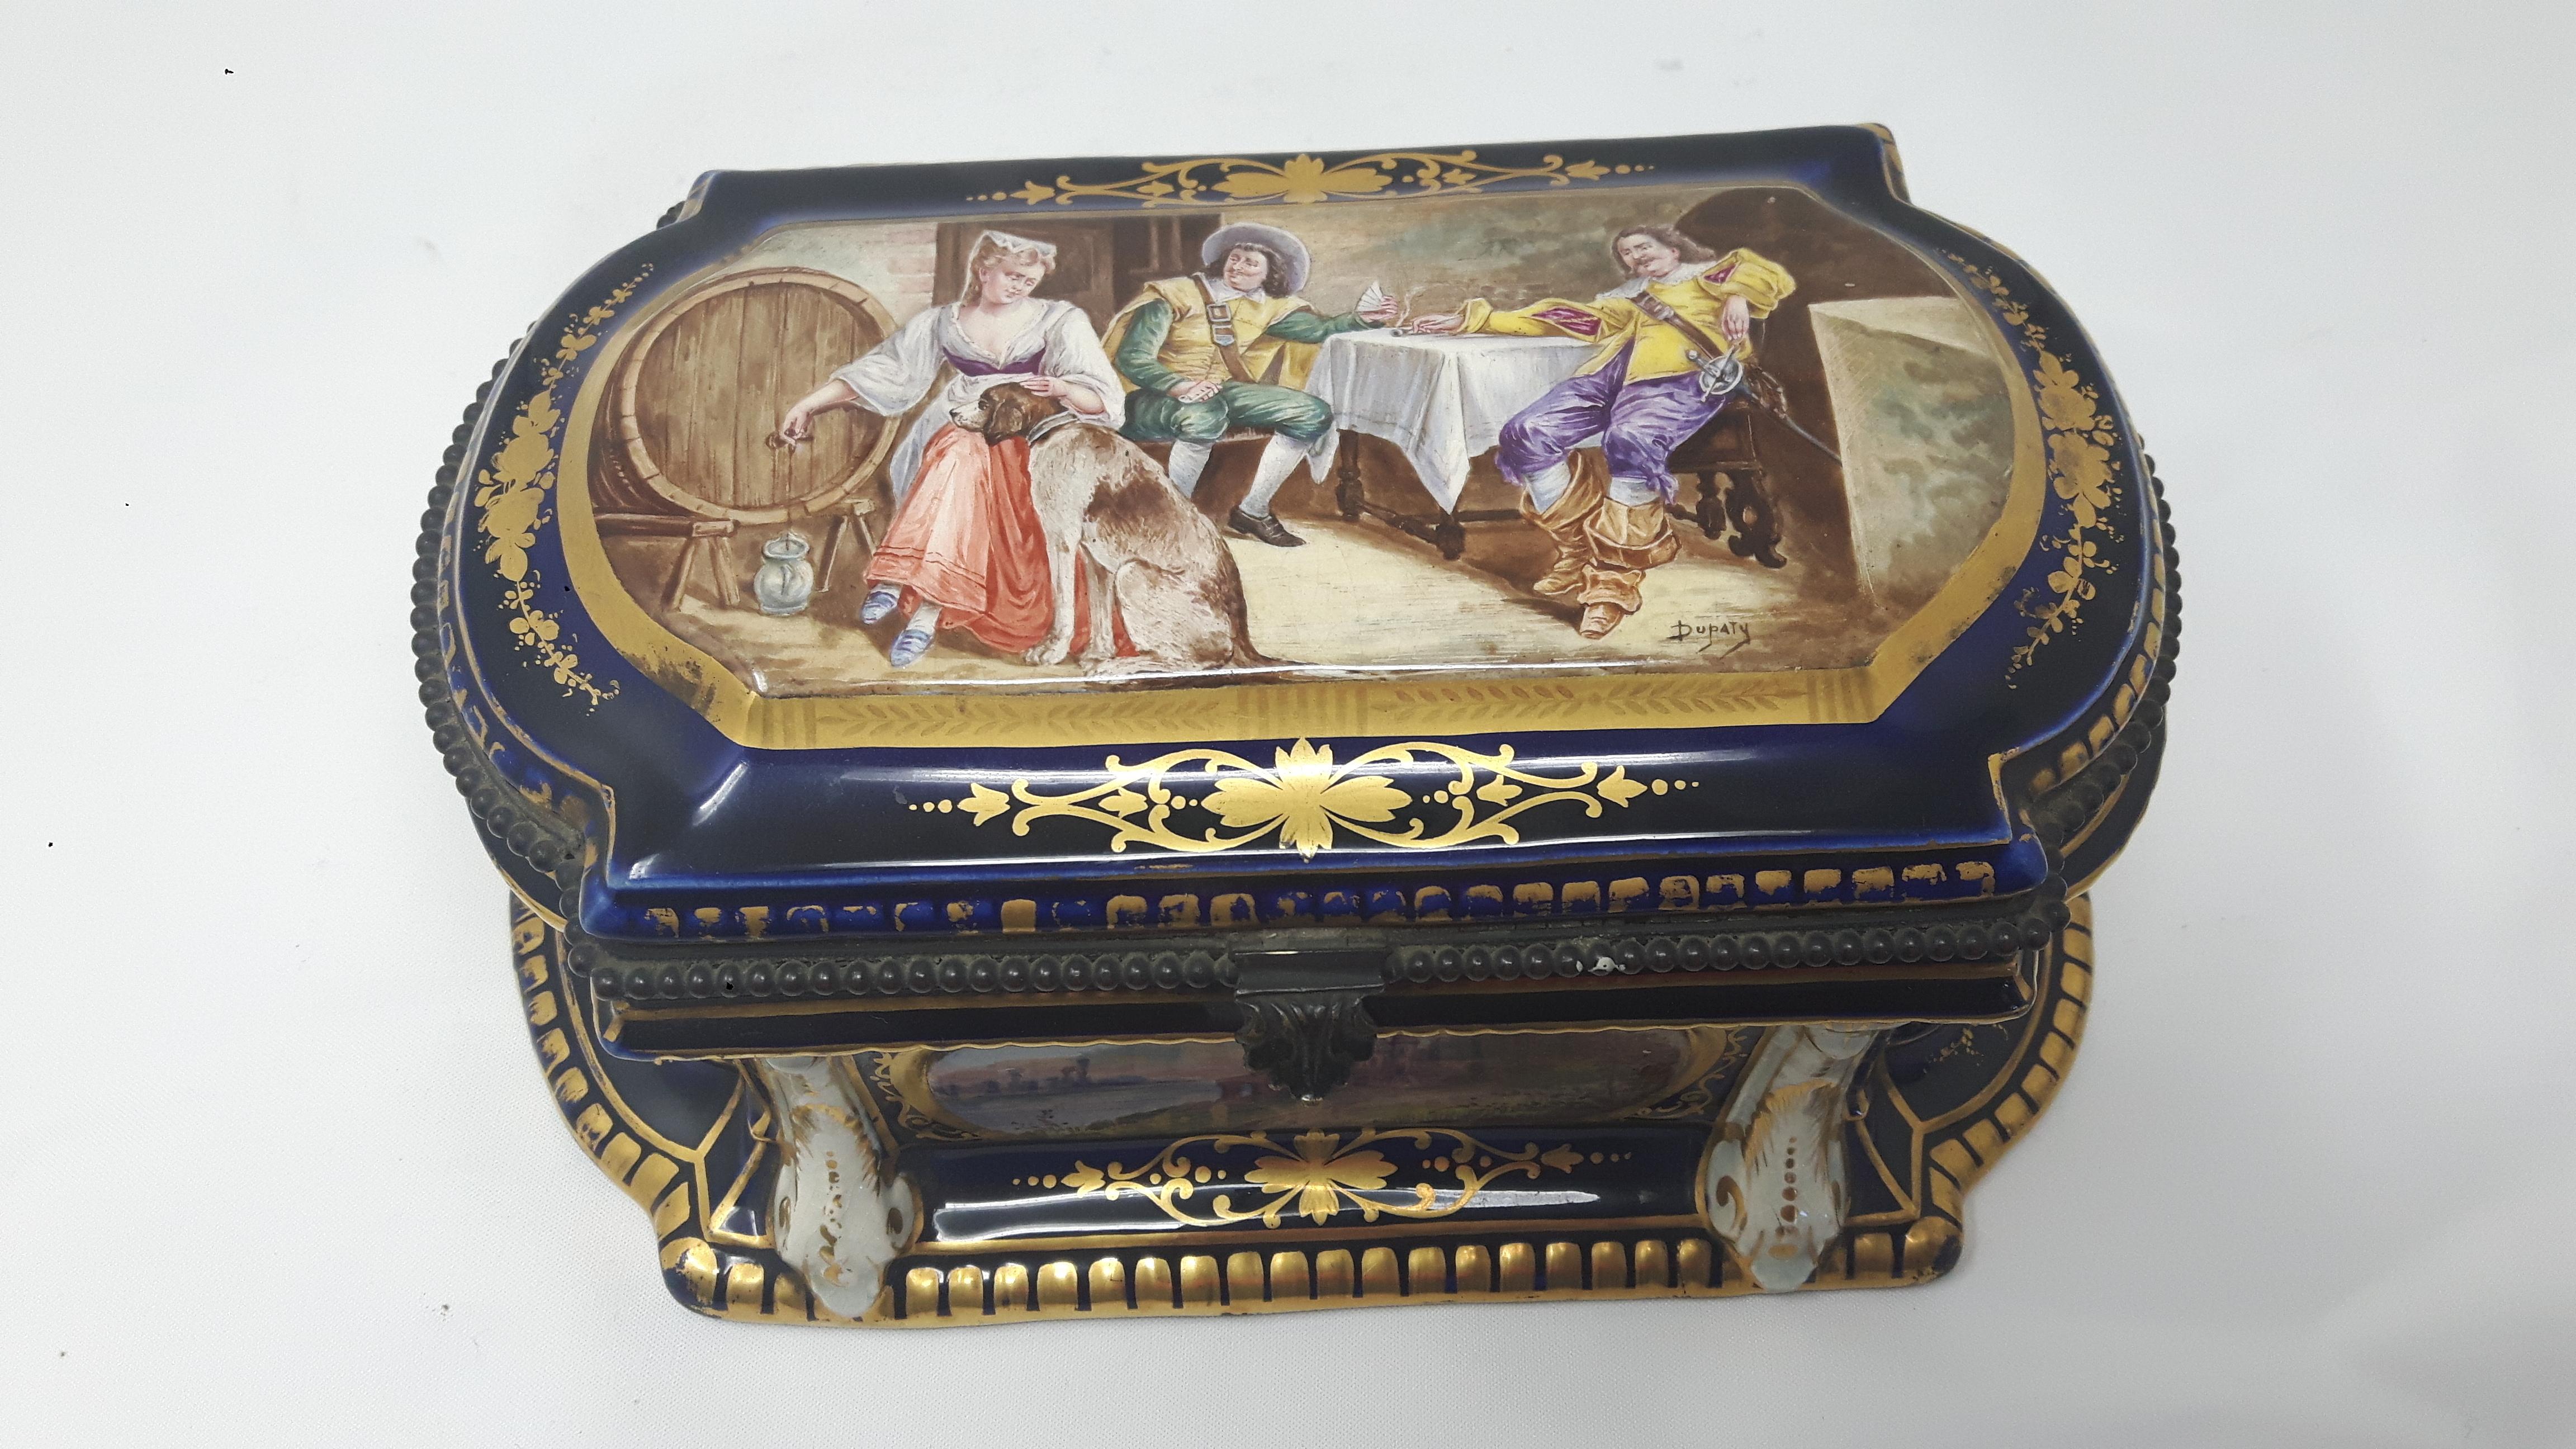 A Paris Porcelain hand-painted jewellery box in the Sèvres style with cartouches of a medieval tavern scene and country scenes. The box is heavily gilt with garlands in the 18th century manner.
The mounts are in ormolu.
Paris, circa 1880-1890.